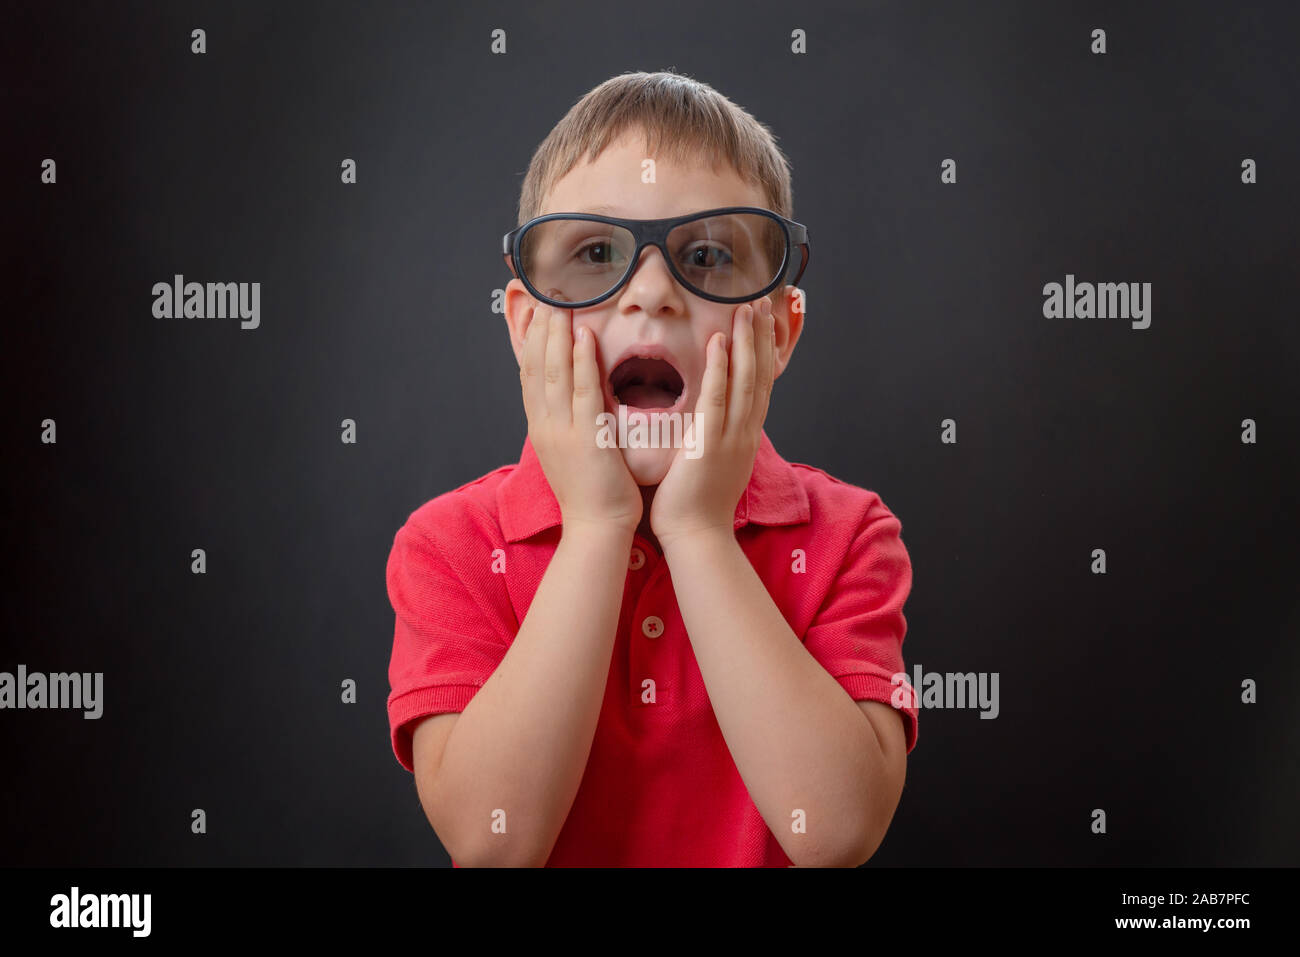 Surprised boy with open mouth and with hands on his face watching a movie with 3d glasses. Black background. Stock Photo